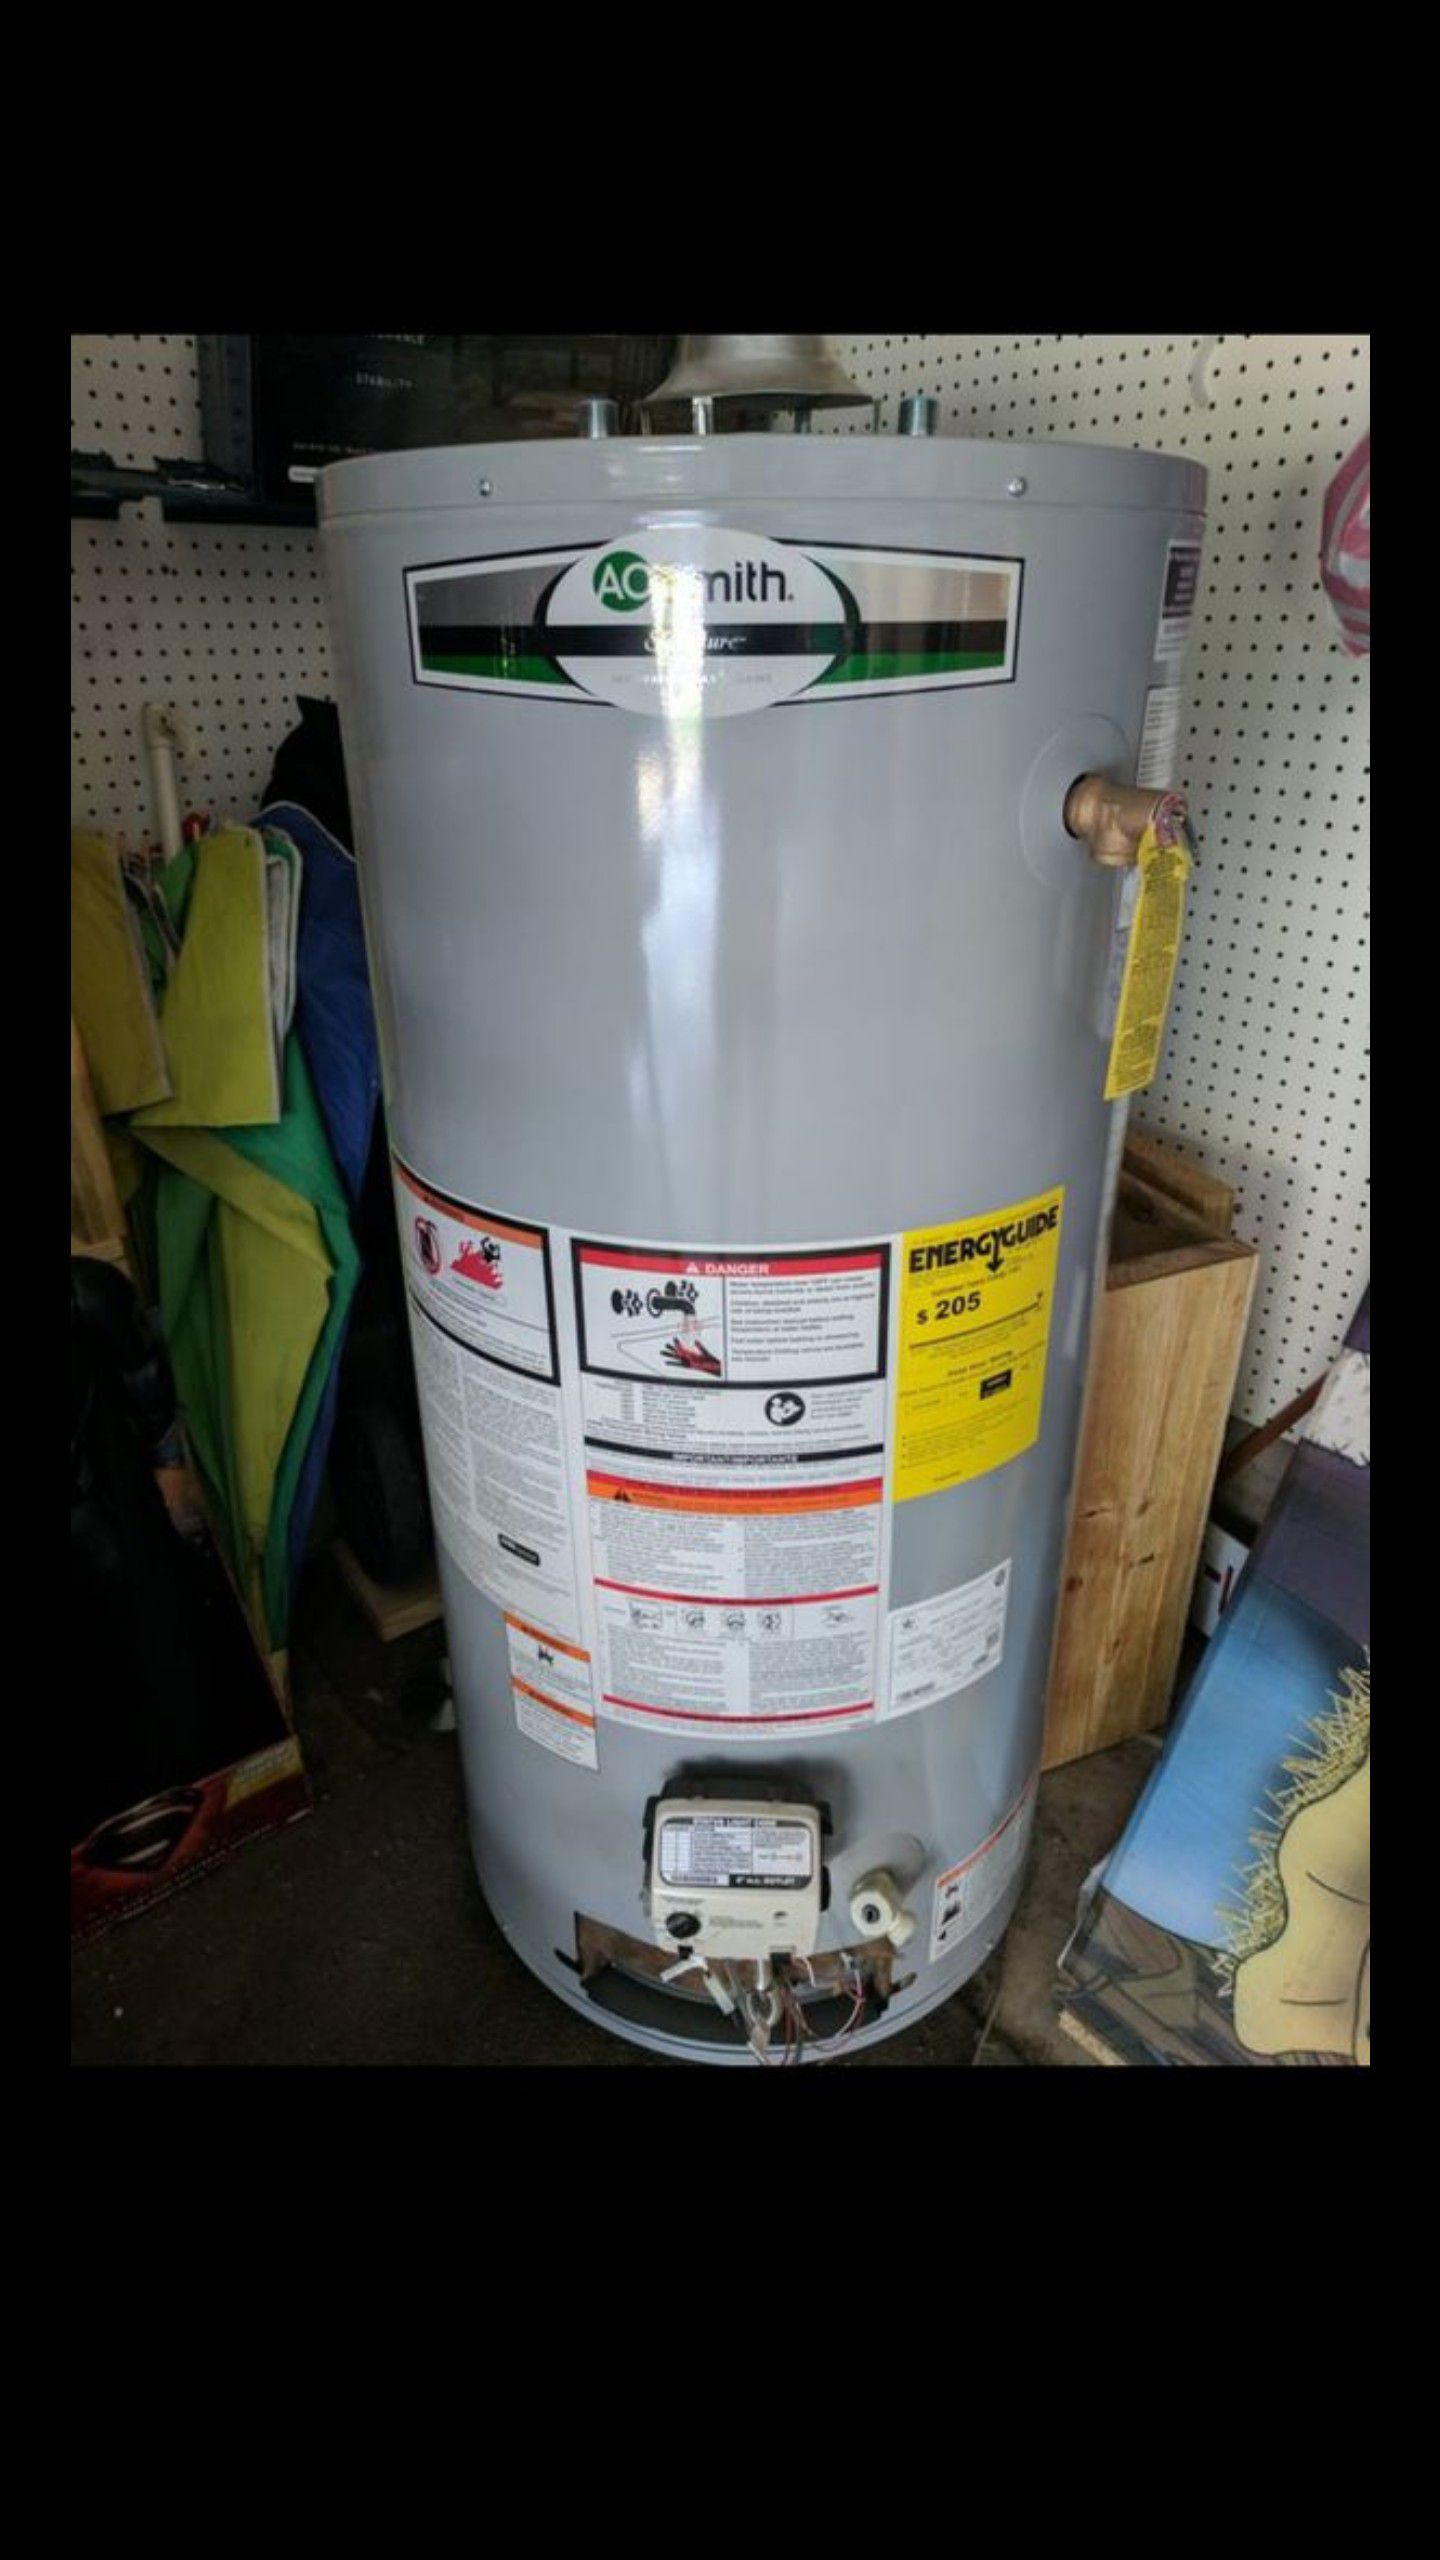 New 40 gallon gas water heater out of box